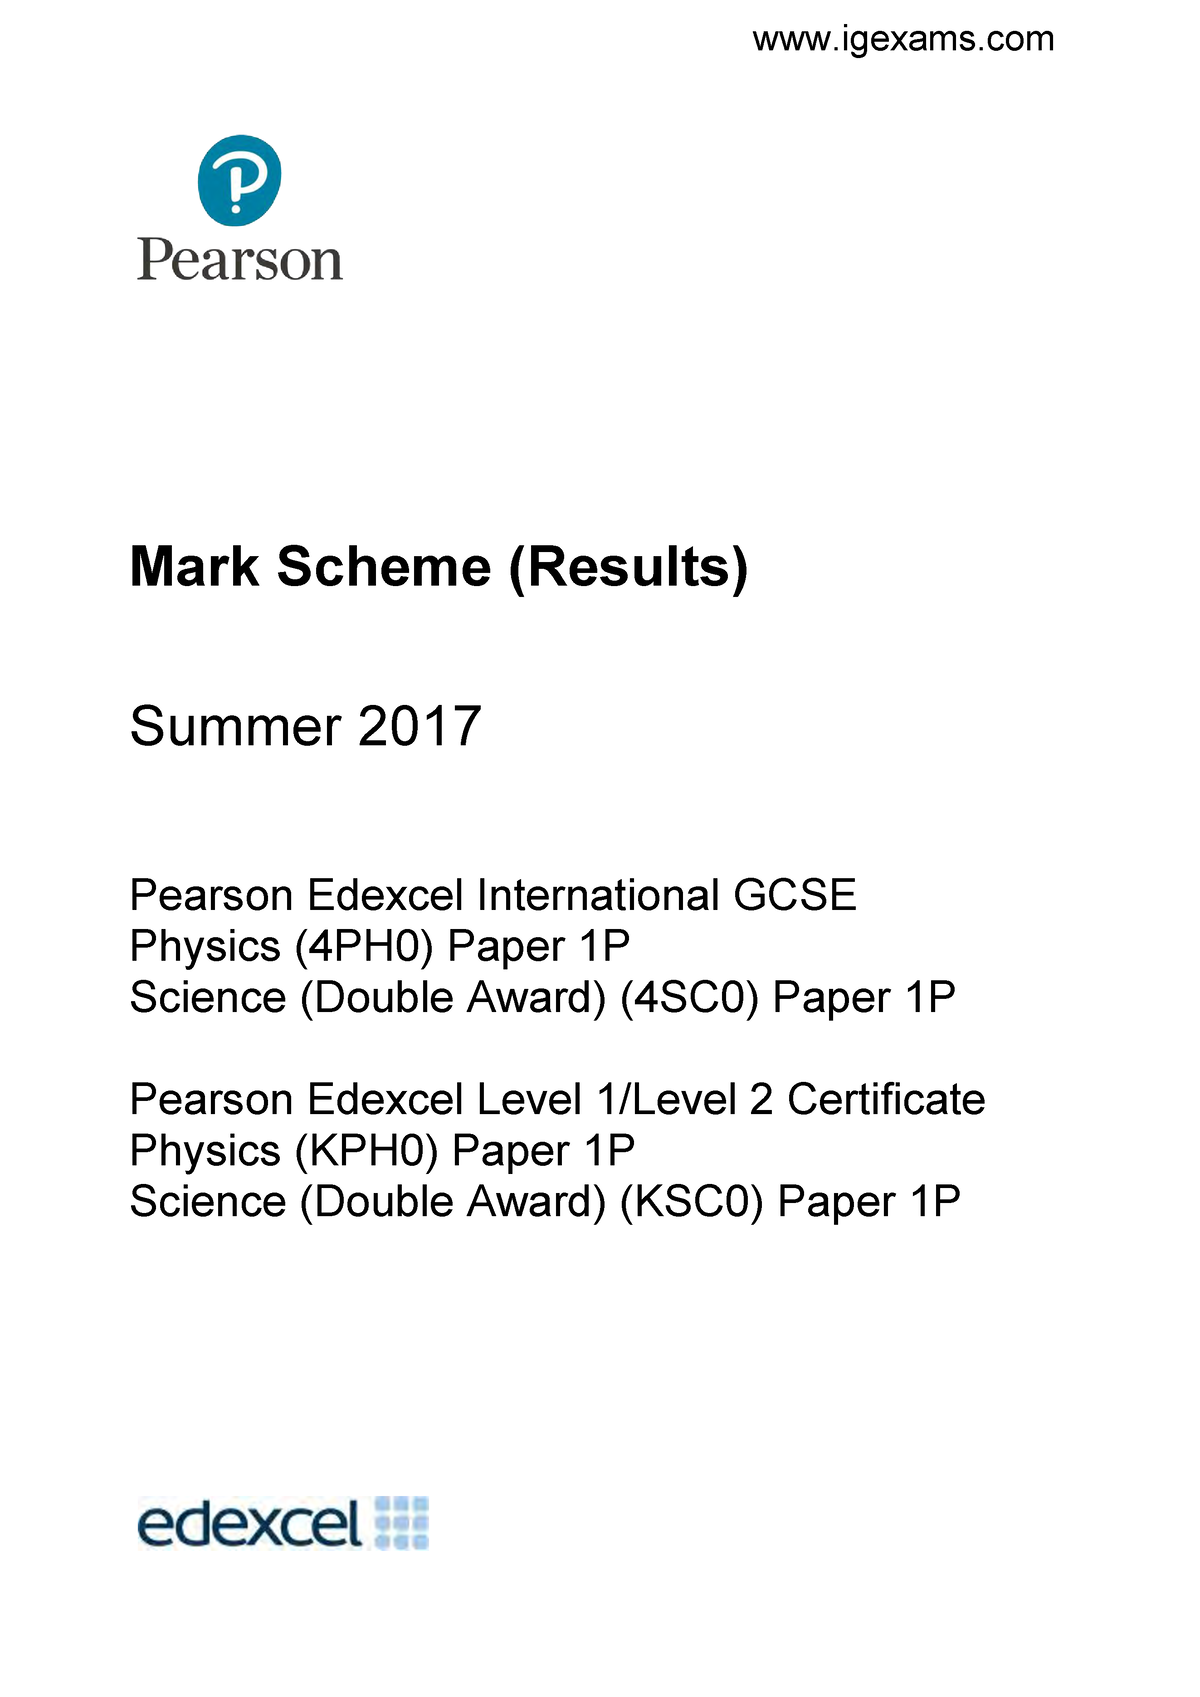 Pearson Edexcel International GCSE In Physics (4PH1) Paper 1P and